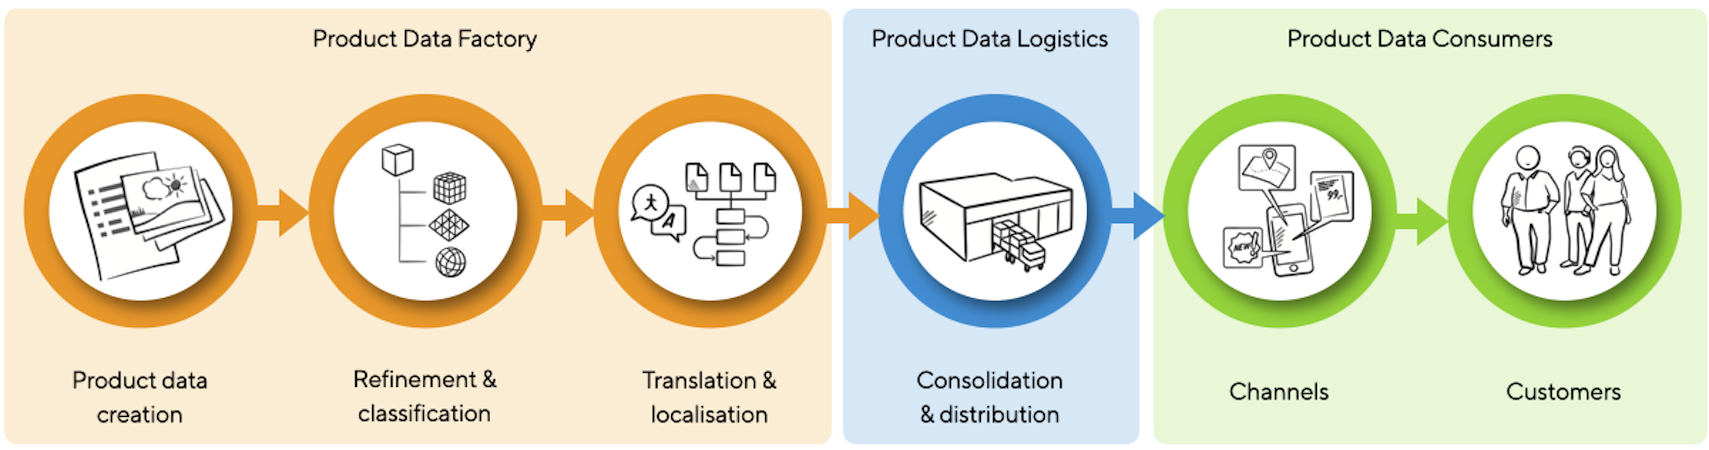 Product data logistics in the context of the digital product data supply chain